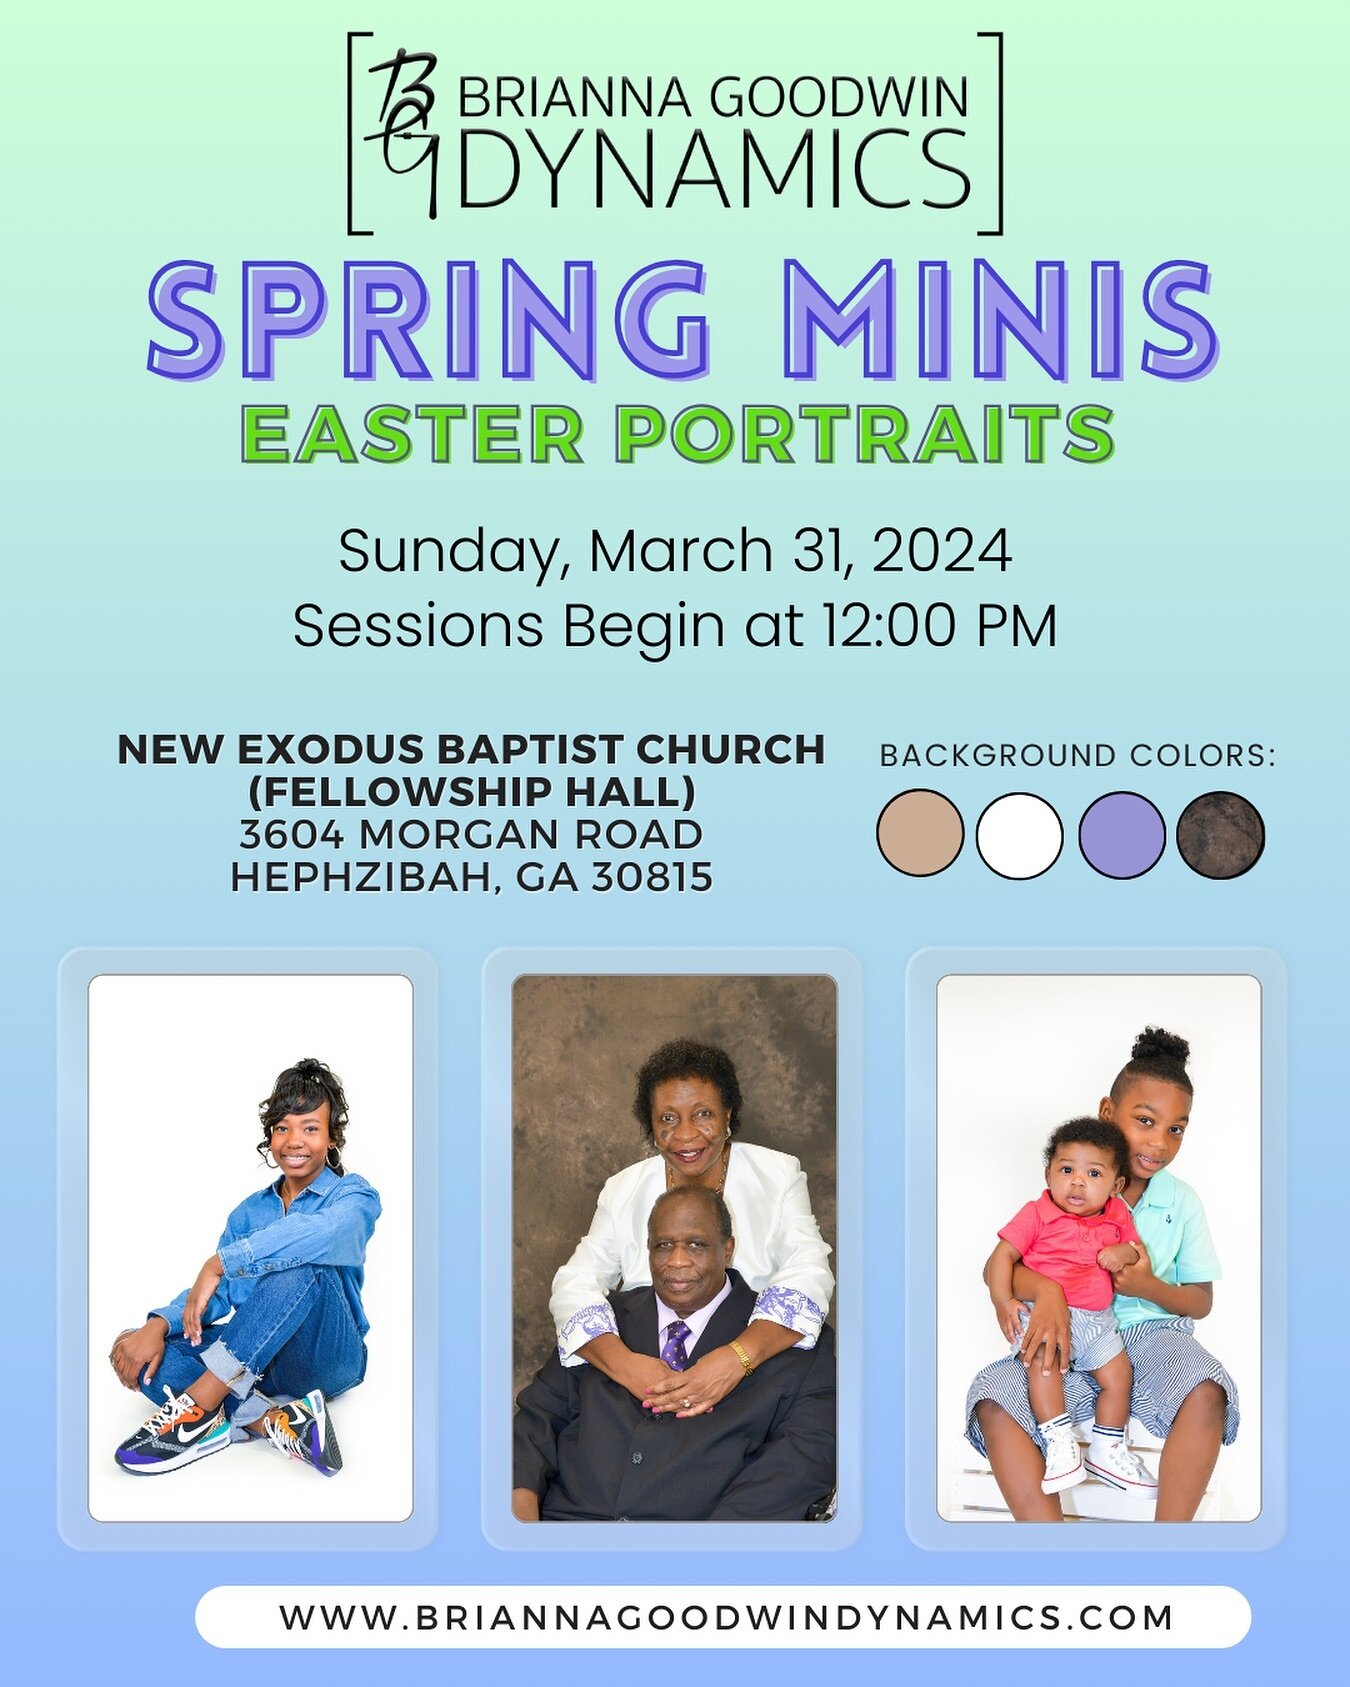 It&rsquo;s that time again for Spring Minis!🌷🌼
This year, I will be back at New Exodus Baptist Church for Easter Portraits on Sunday, March 31, 2024! Comment &lsquo;MORE INFO&rsquo; or send me a message for details. ⚡️

www.briannagoodwindynamics.c